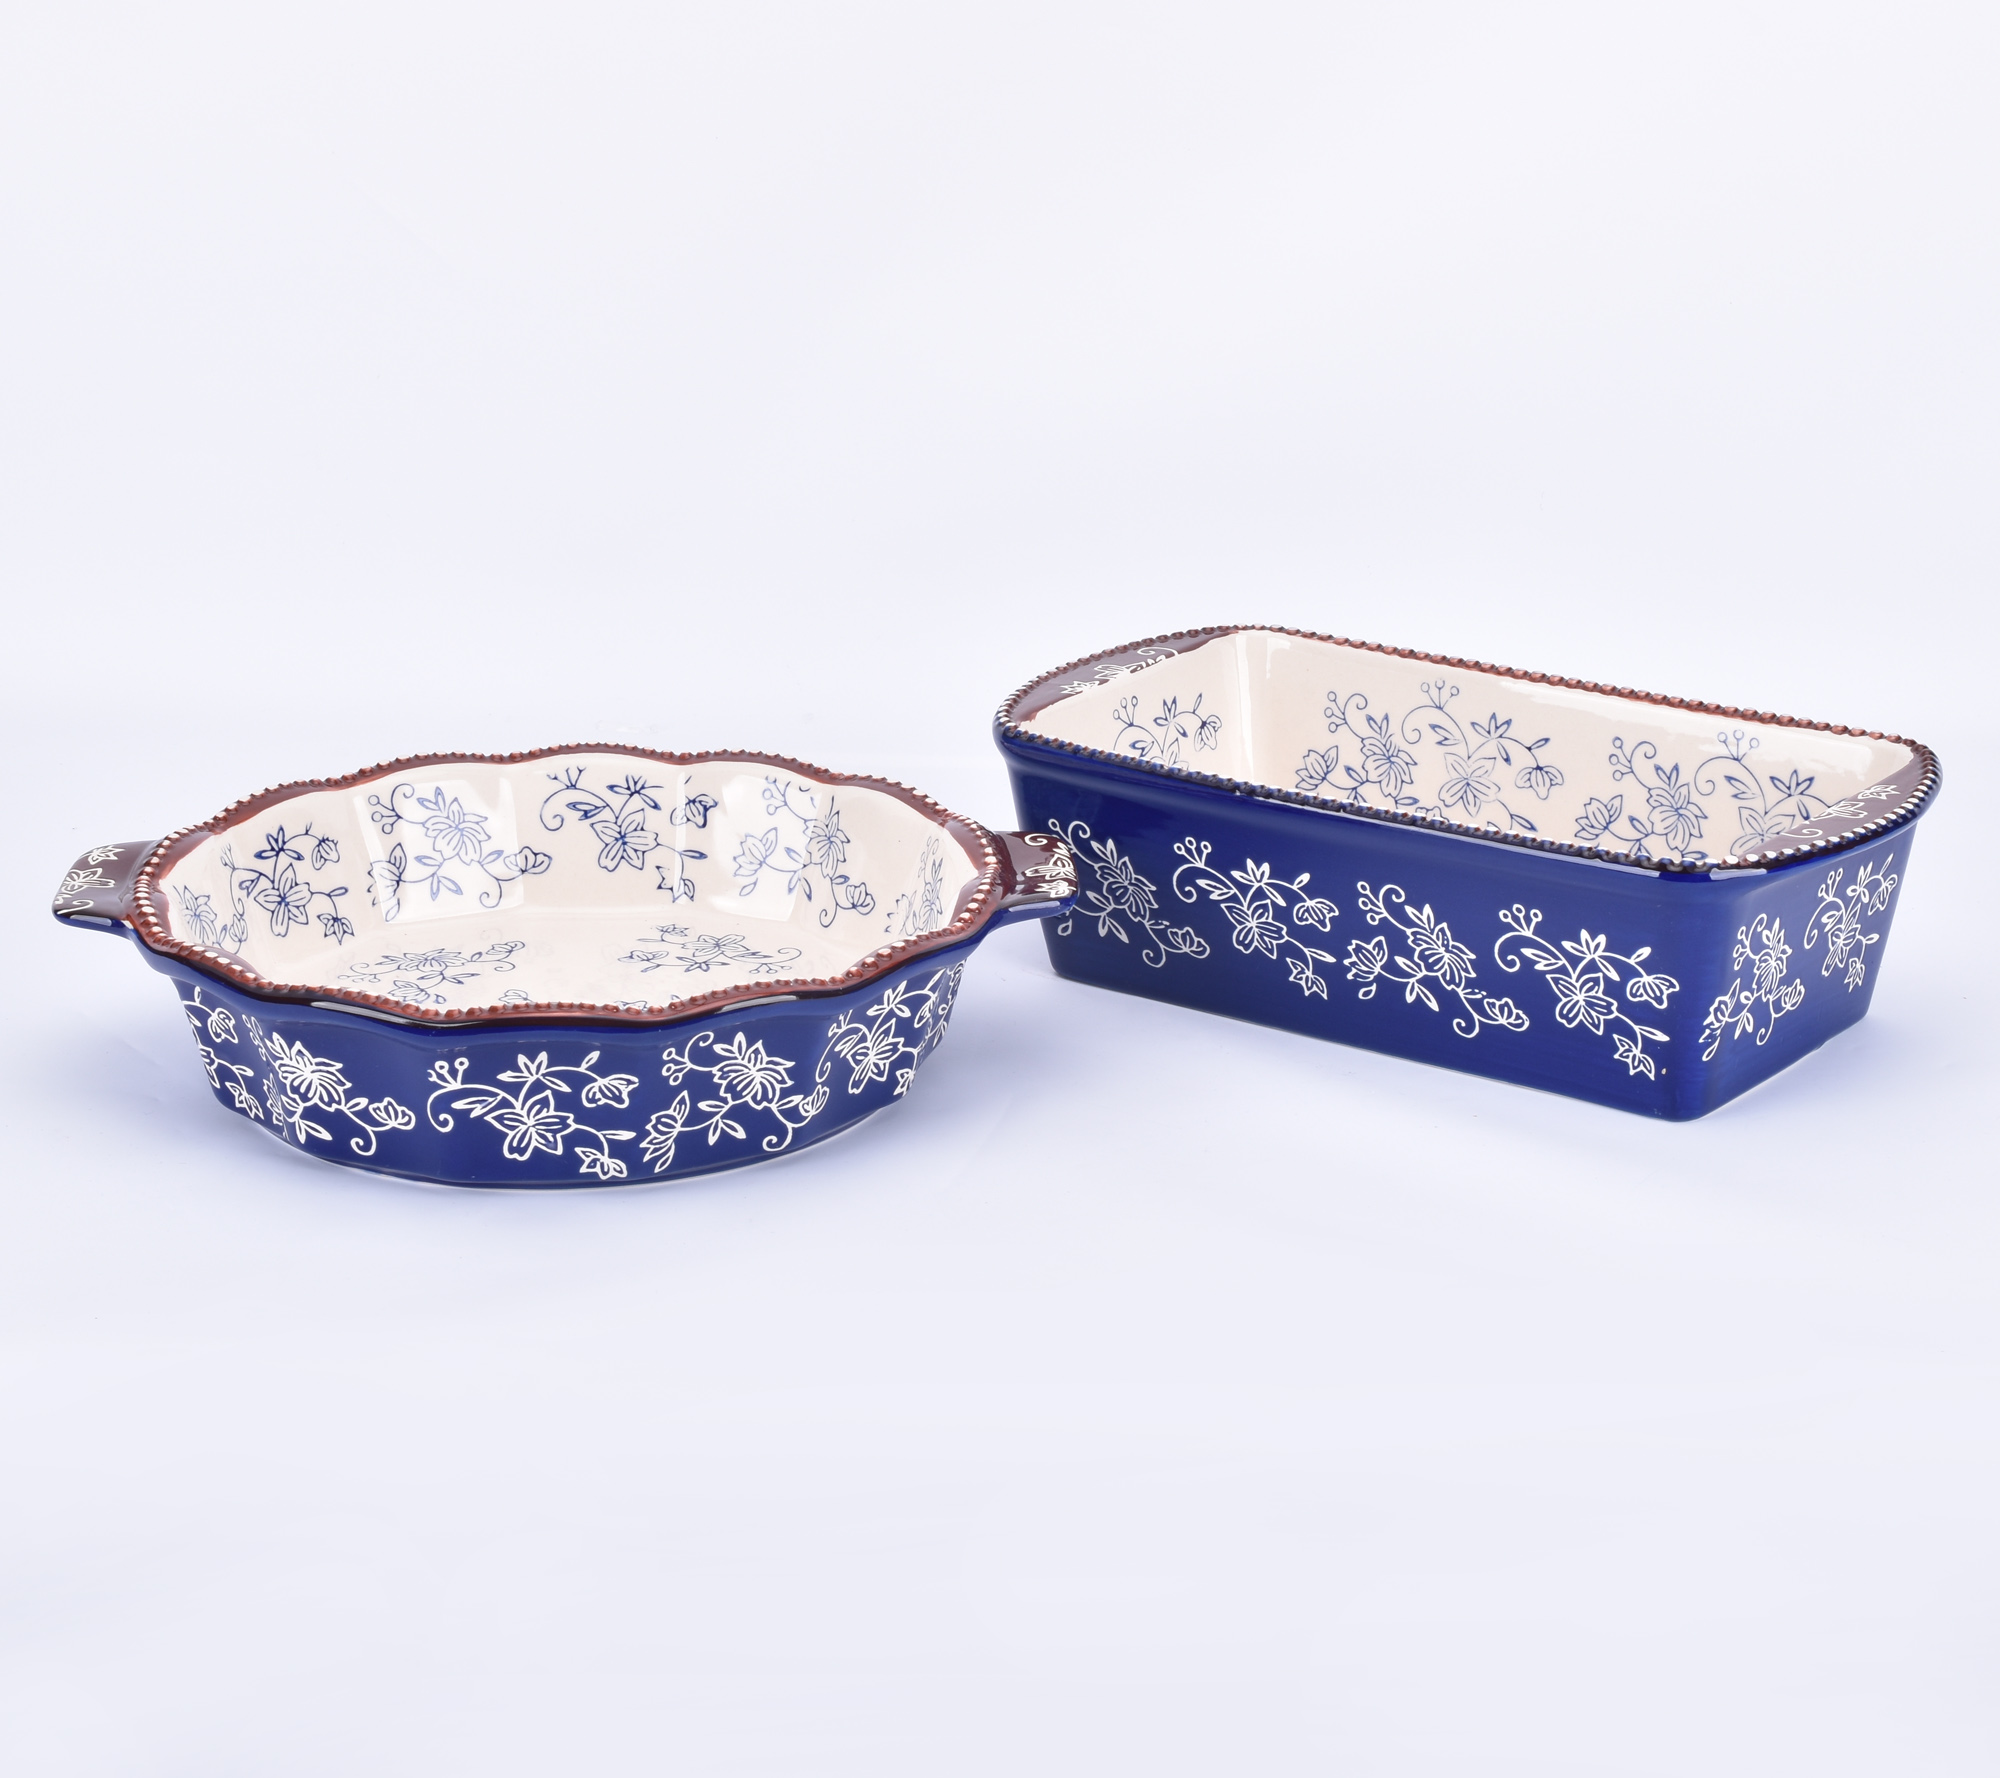 temp-tations® Floral Lace Pie and Loaf Bakeware Set – 2 Piece – Blue